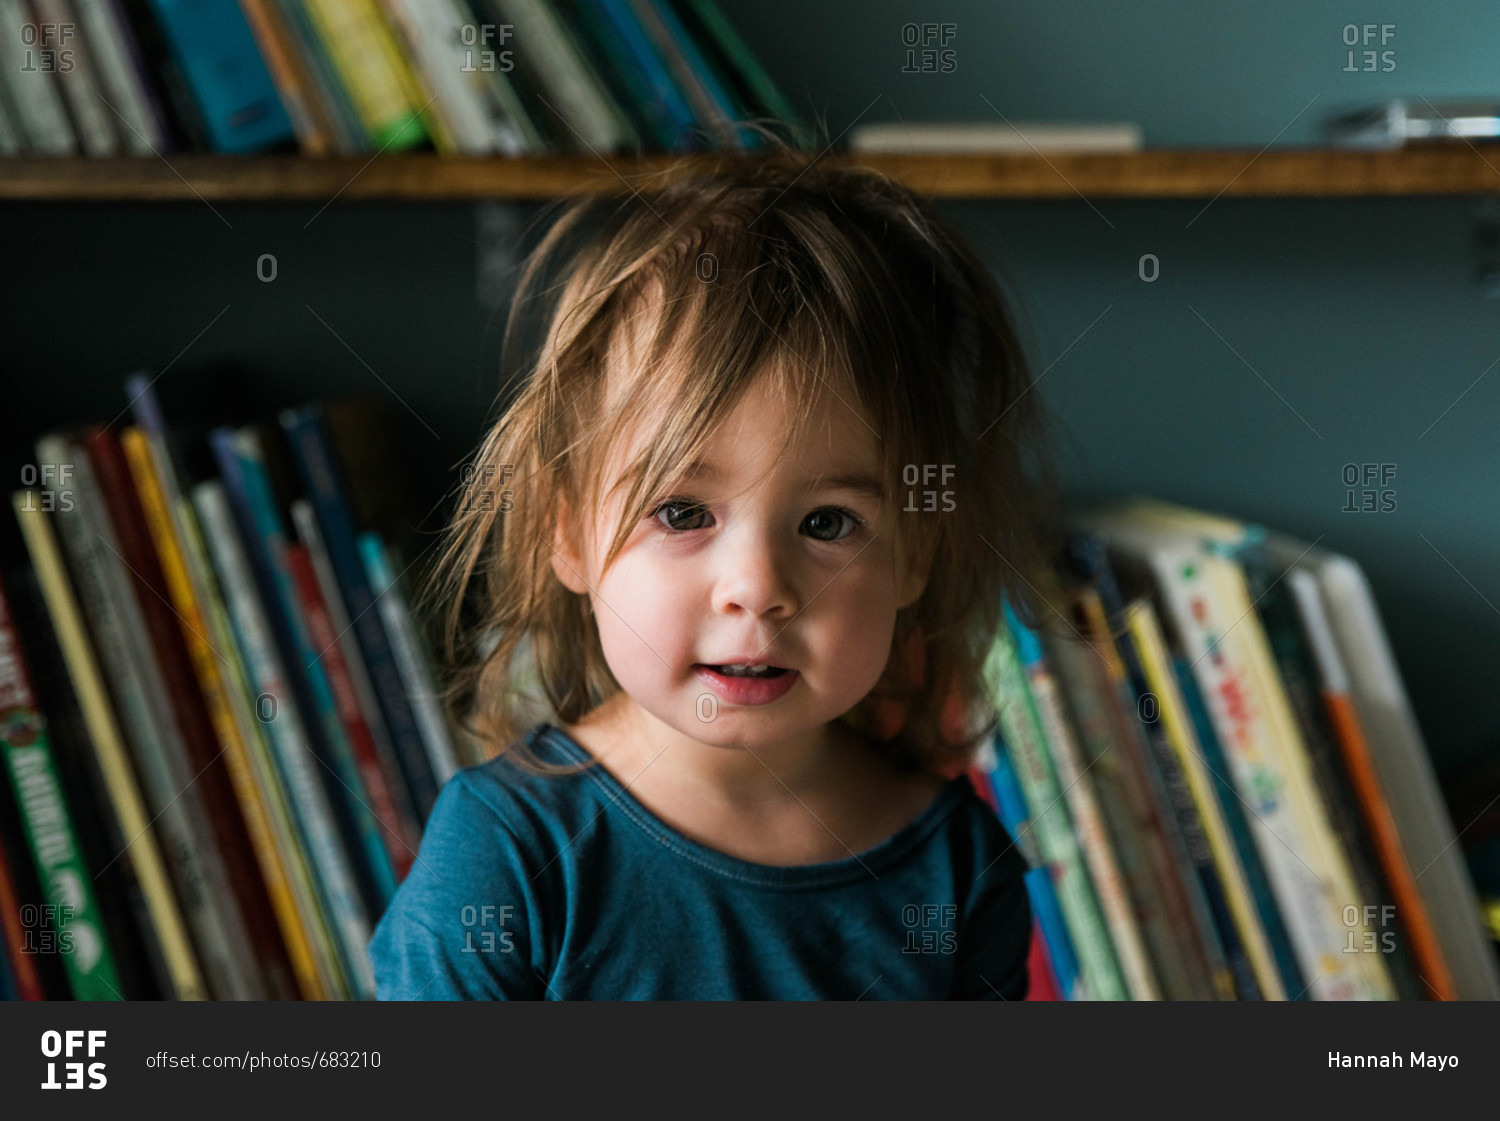 Portrait of little girl just after waking up in front of her book case